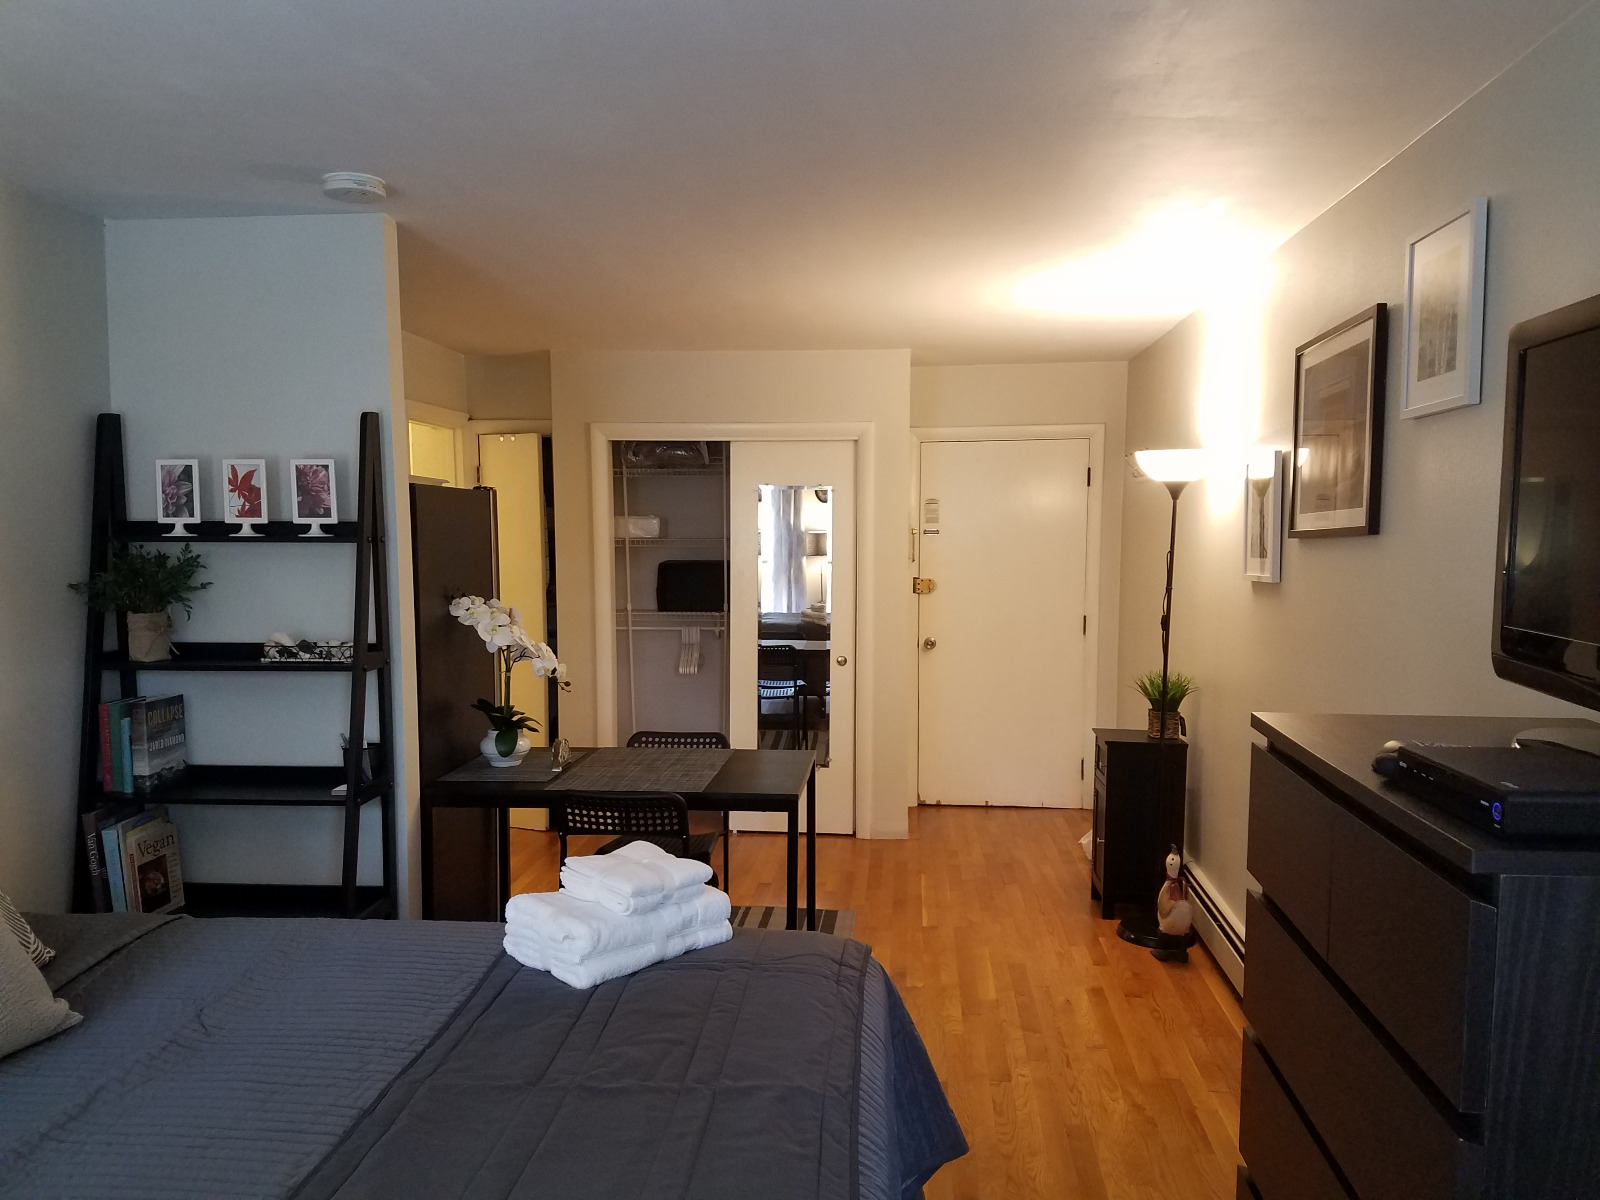 Photos of apartment on Winthrop Rd.,Brookline MA 02446